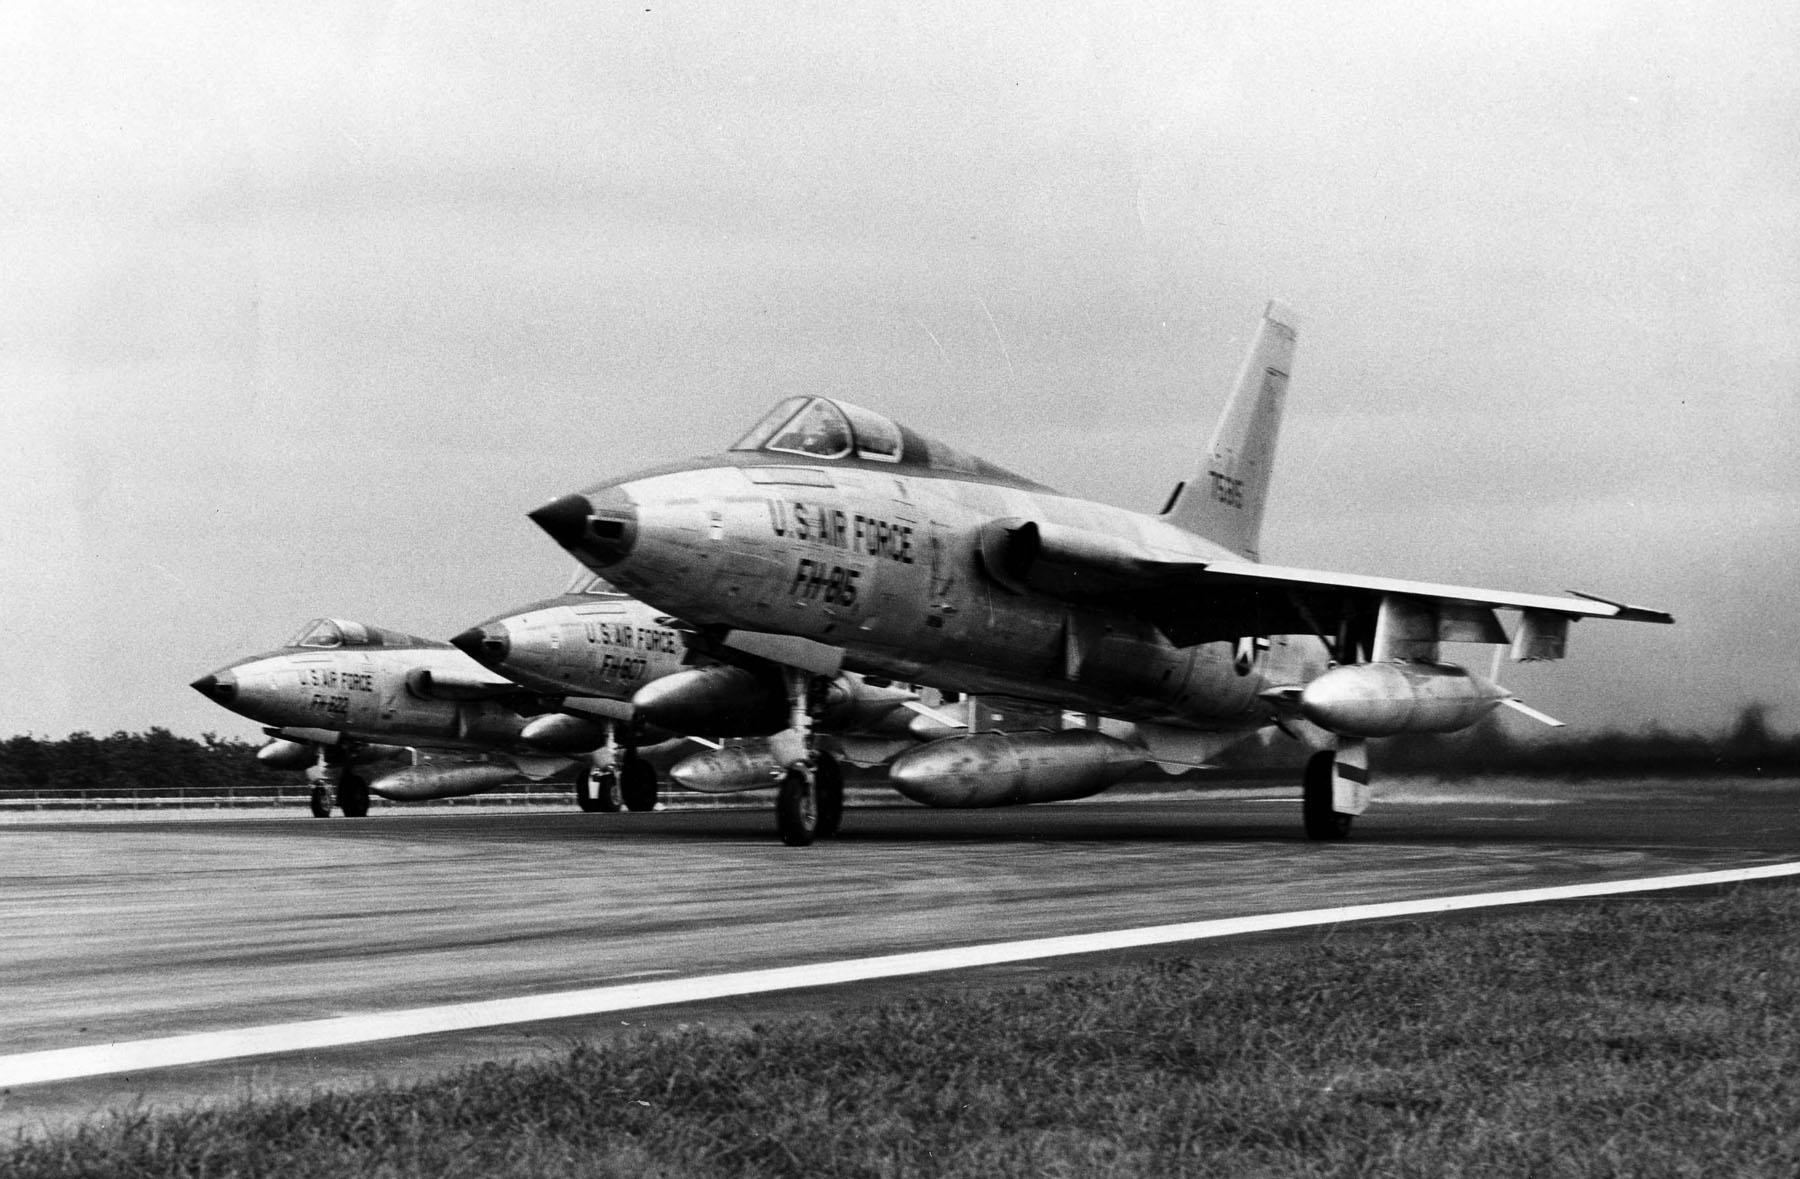 Three Republic F-105B-20-RE Thunderchiefs, serial numbers 57-5815, 57-5807 and 57-5822, begin their takeoff roll. This is the same block number as the F-105B flown by General Moore for the FAI World Speed Record. (U.S. Air Force)